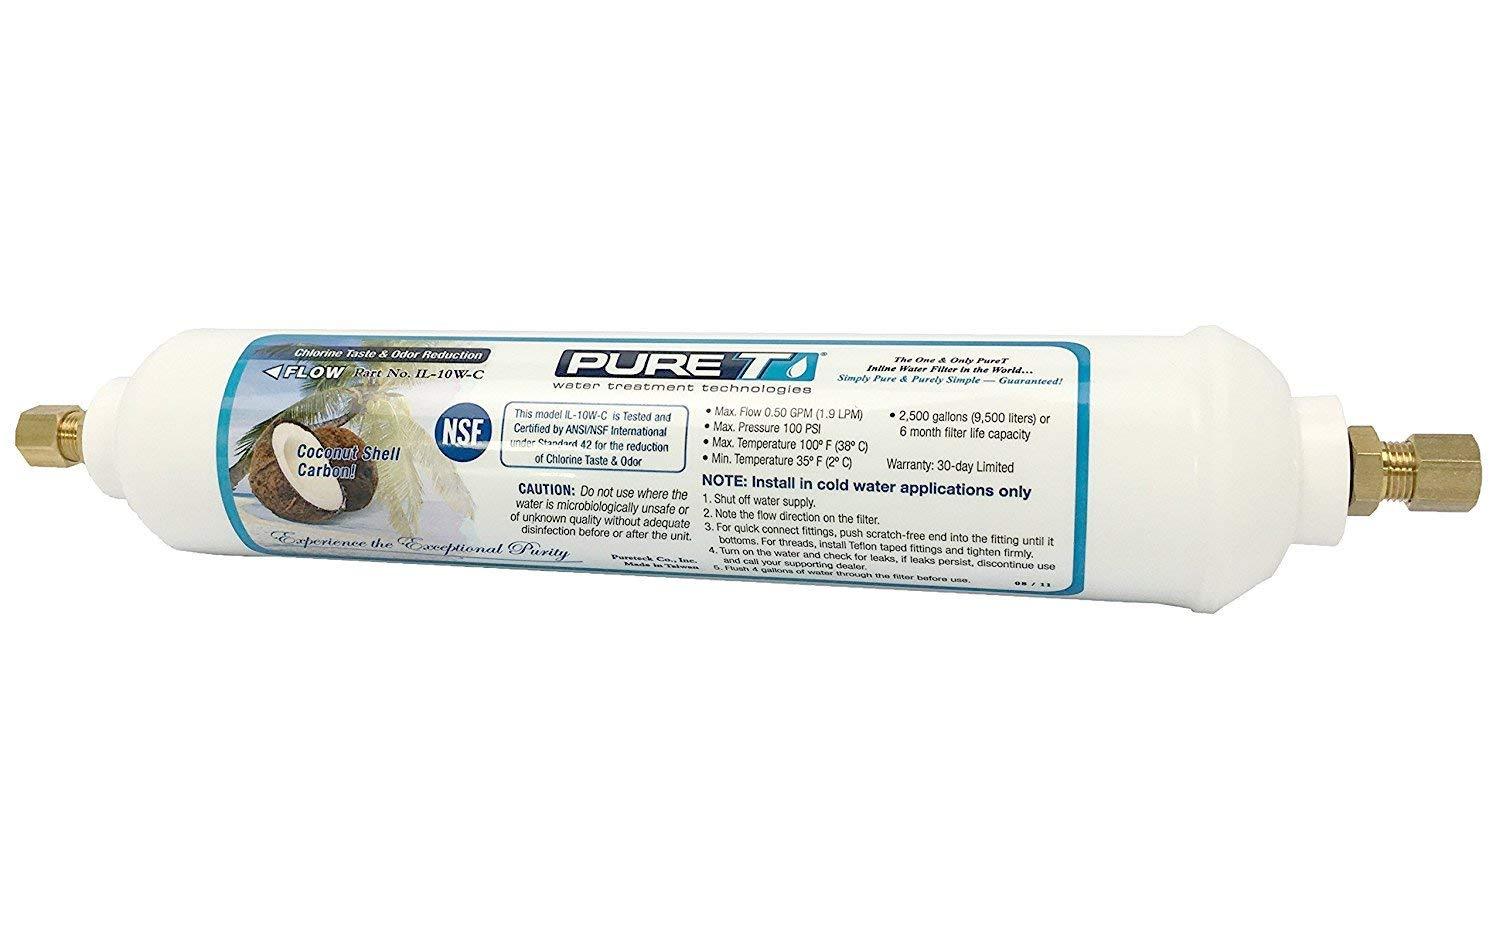 LASCO 37-1821 Ice Maker Inline Filter with 1/4-Inch Compression Connection, 2-Inch x 10-Inch